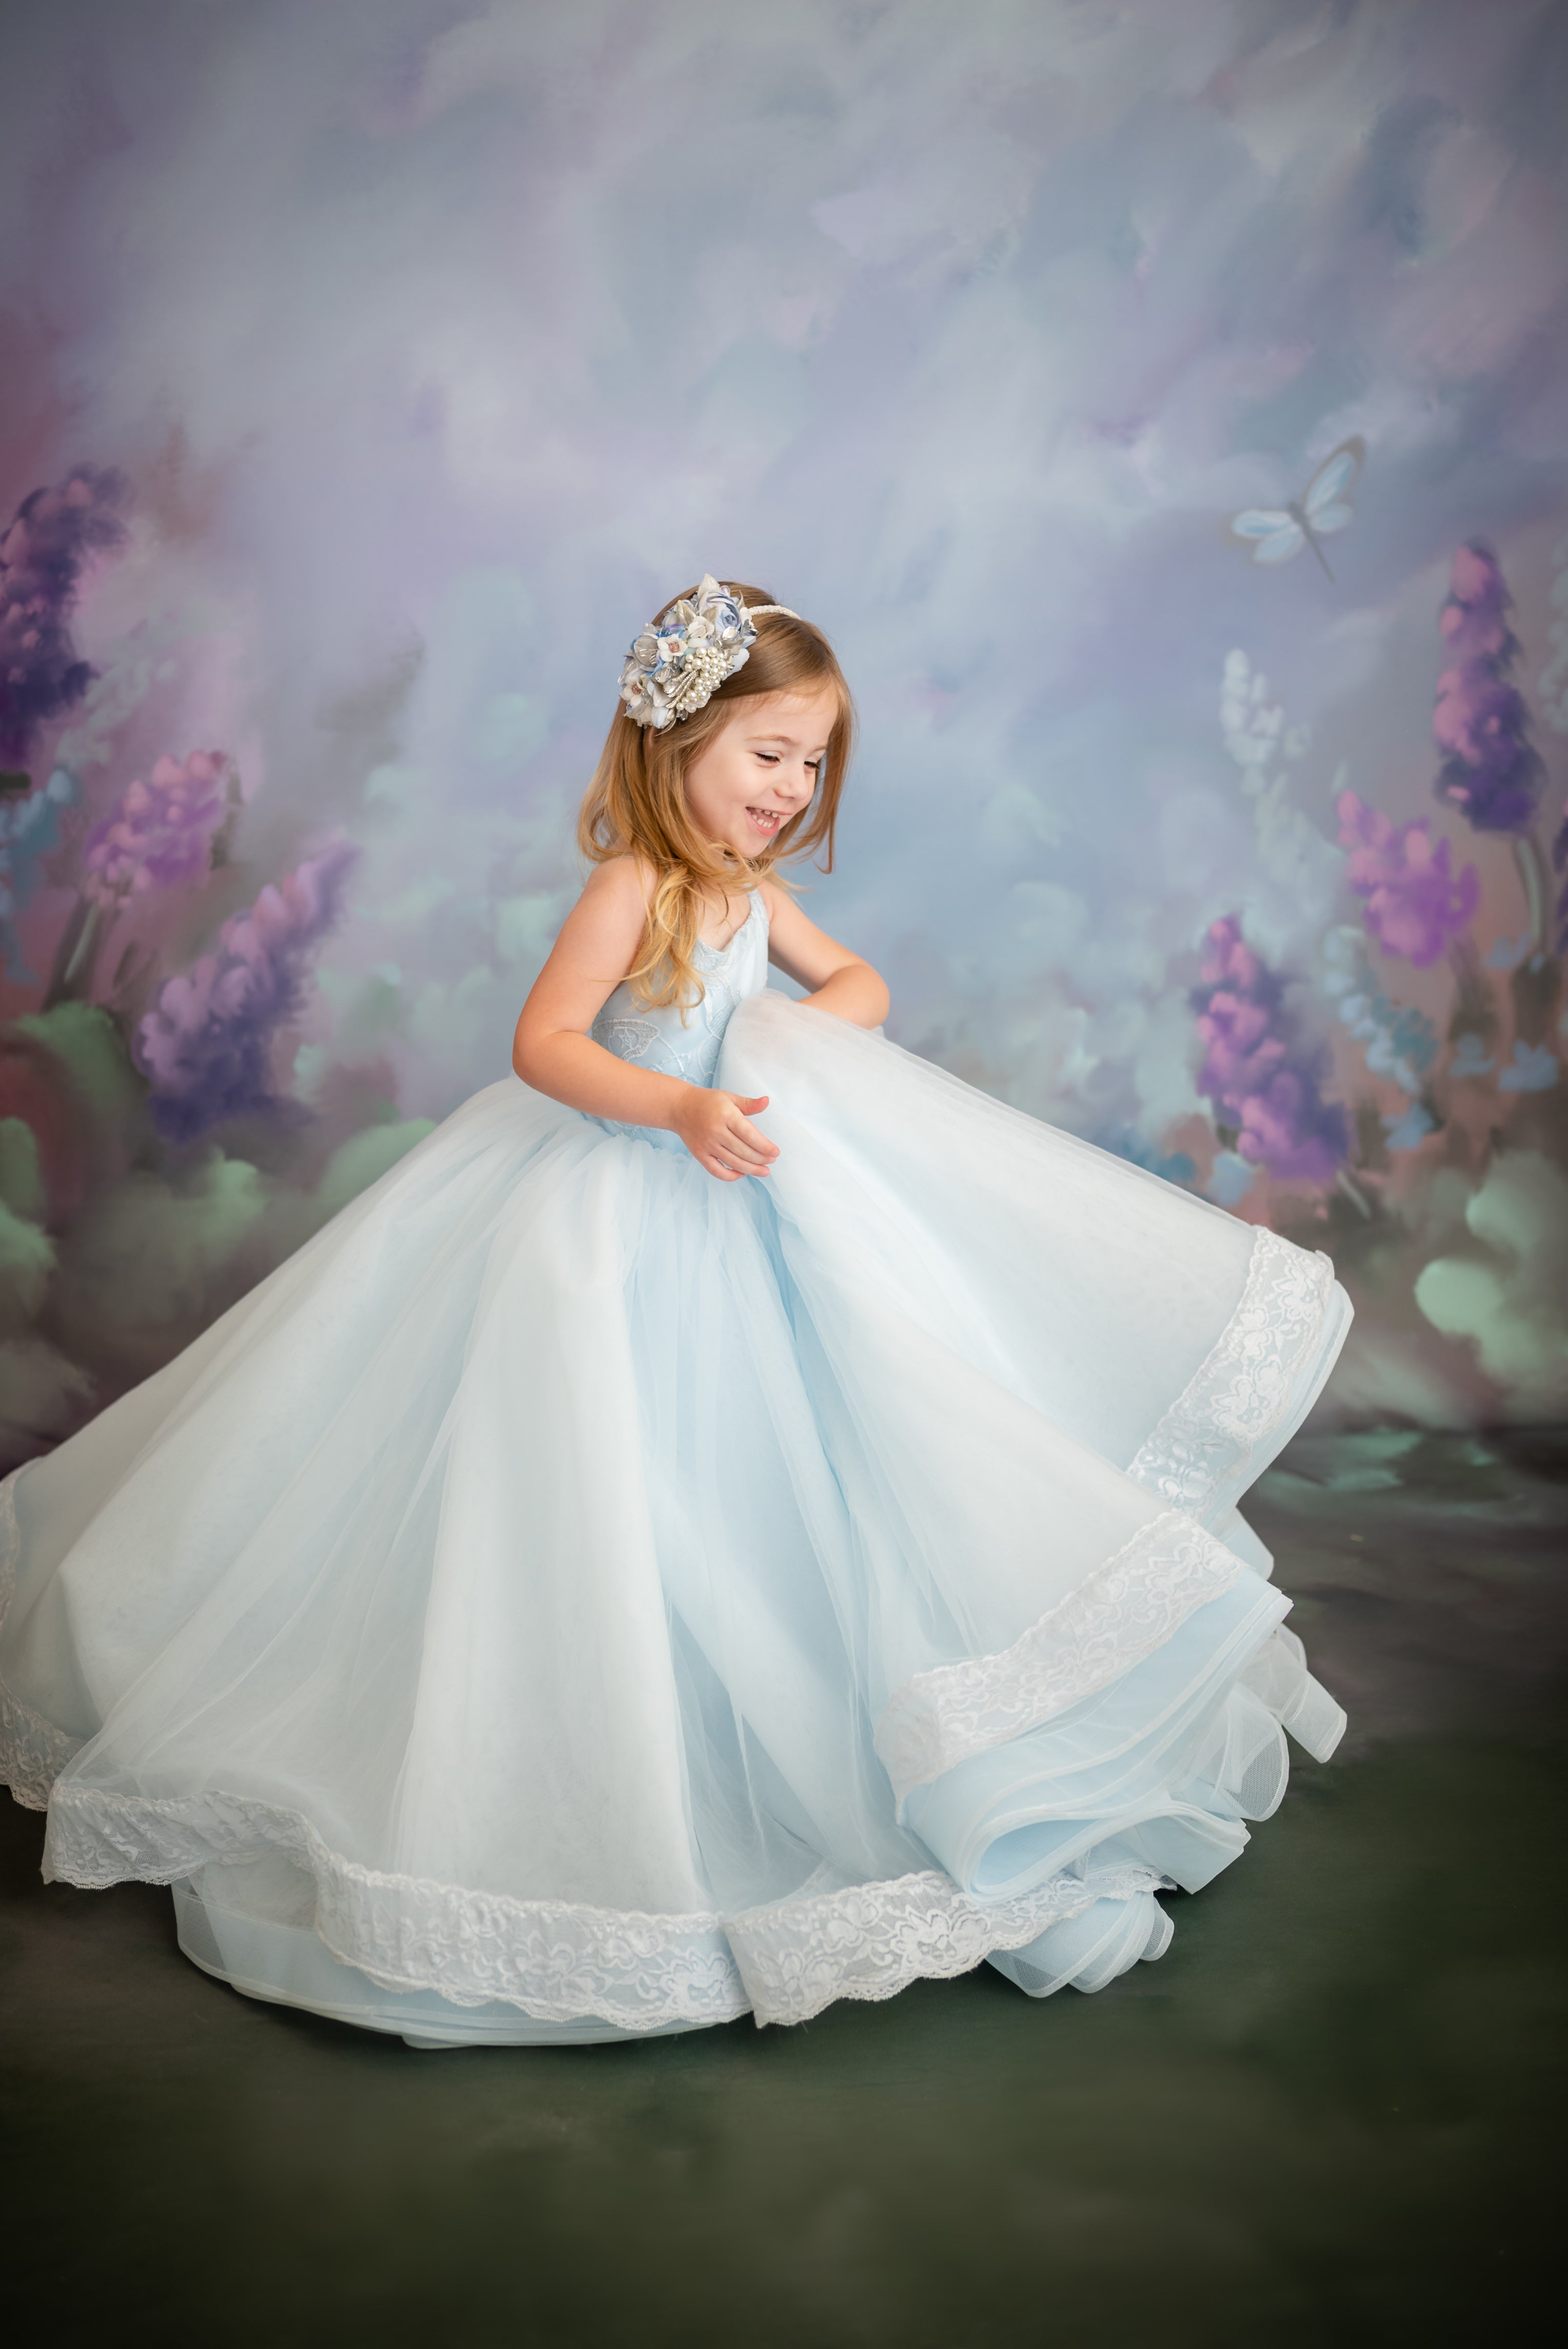 rental dresses for photography sessions: GOWNS FOR PHOTOGRAPHY AND